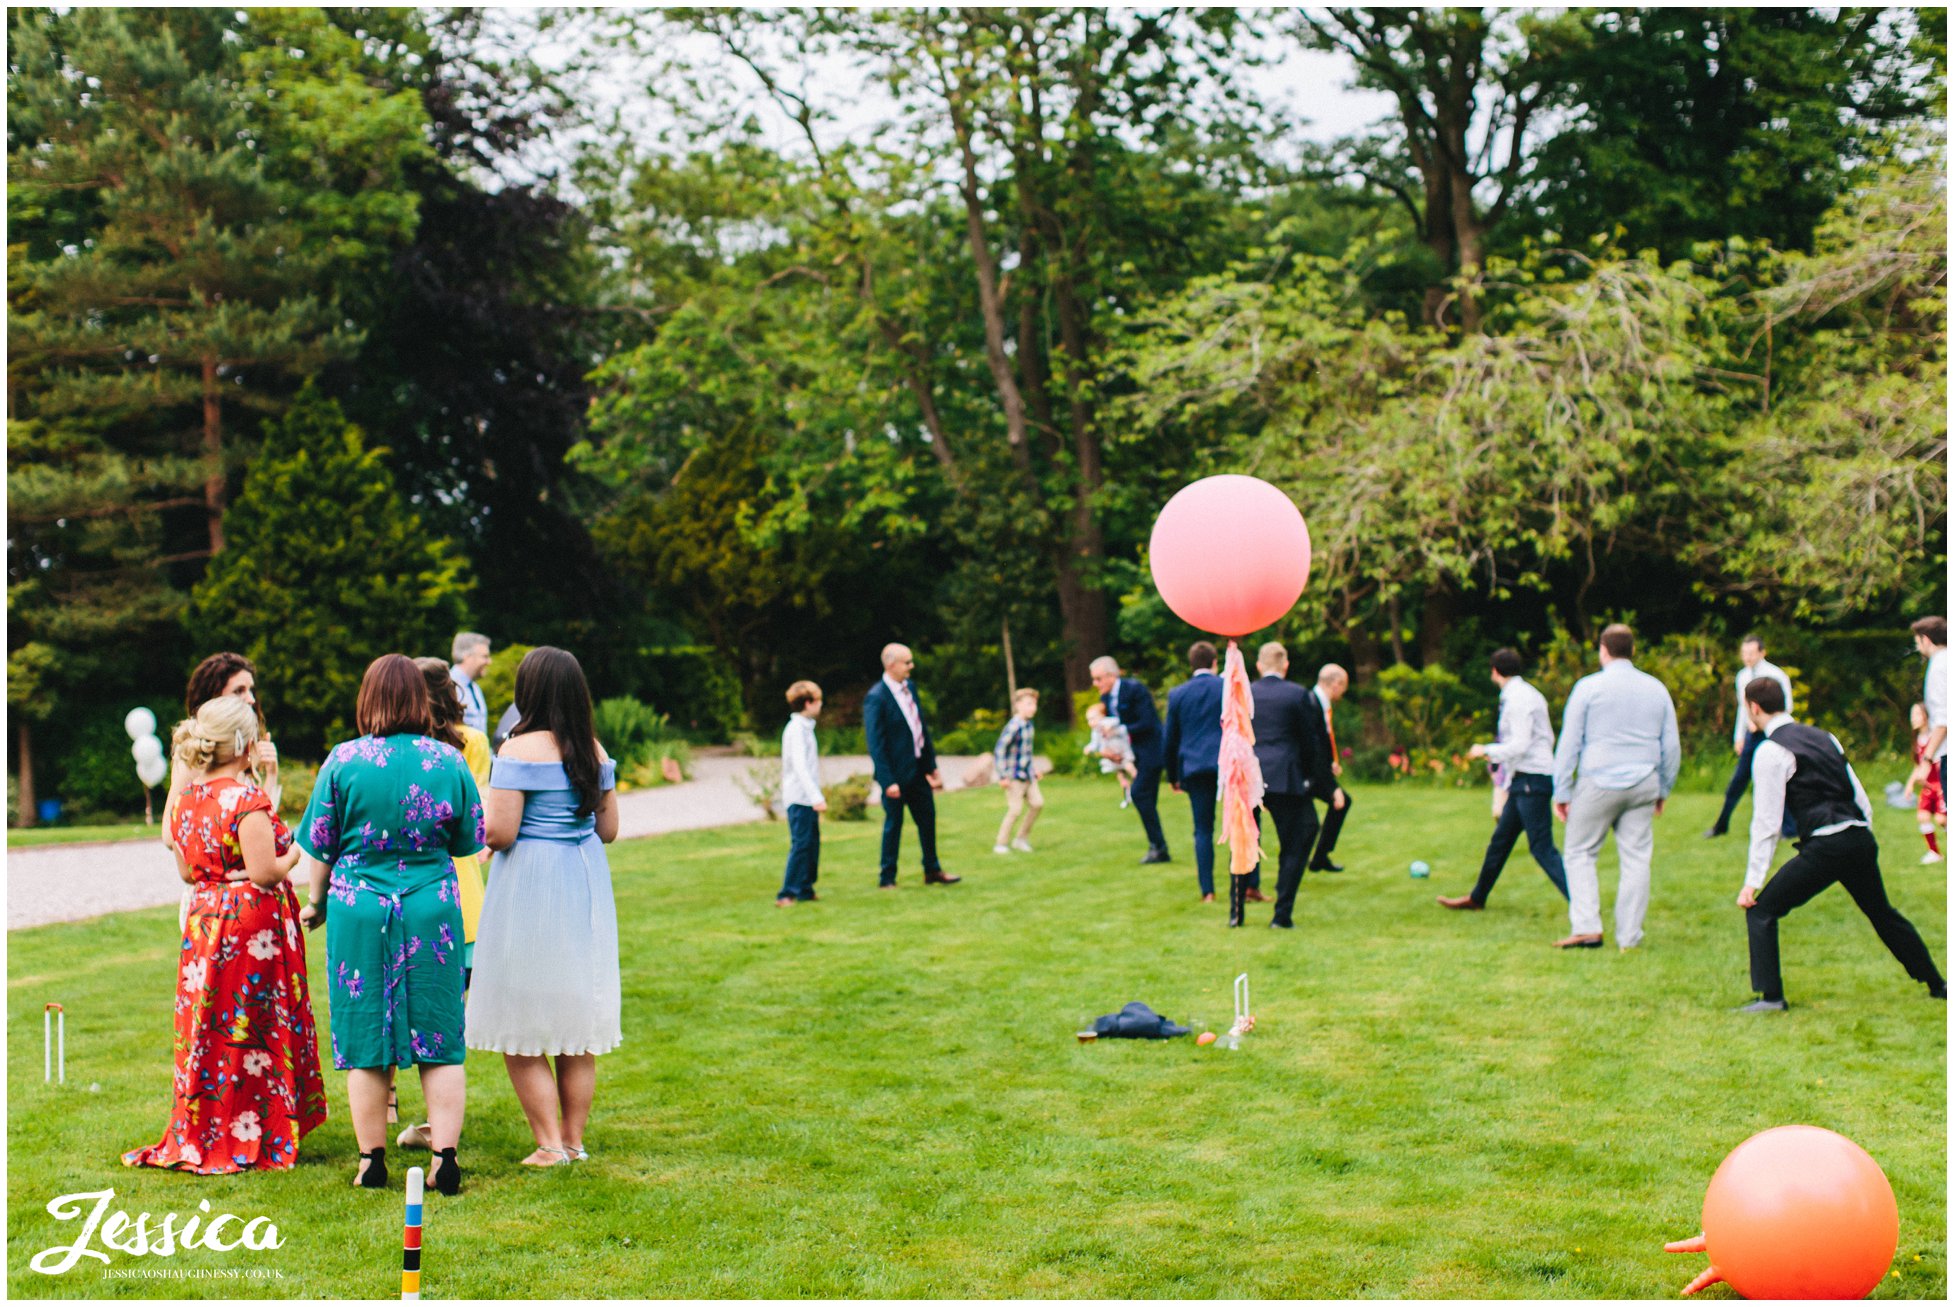 men play football and the women watch at mere brook house wedding